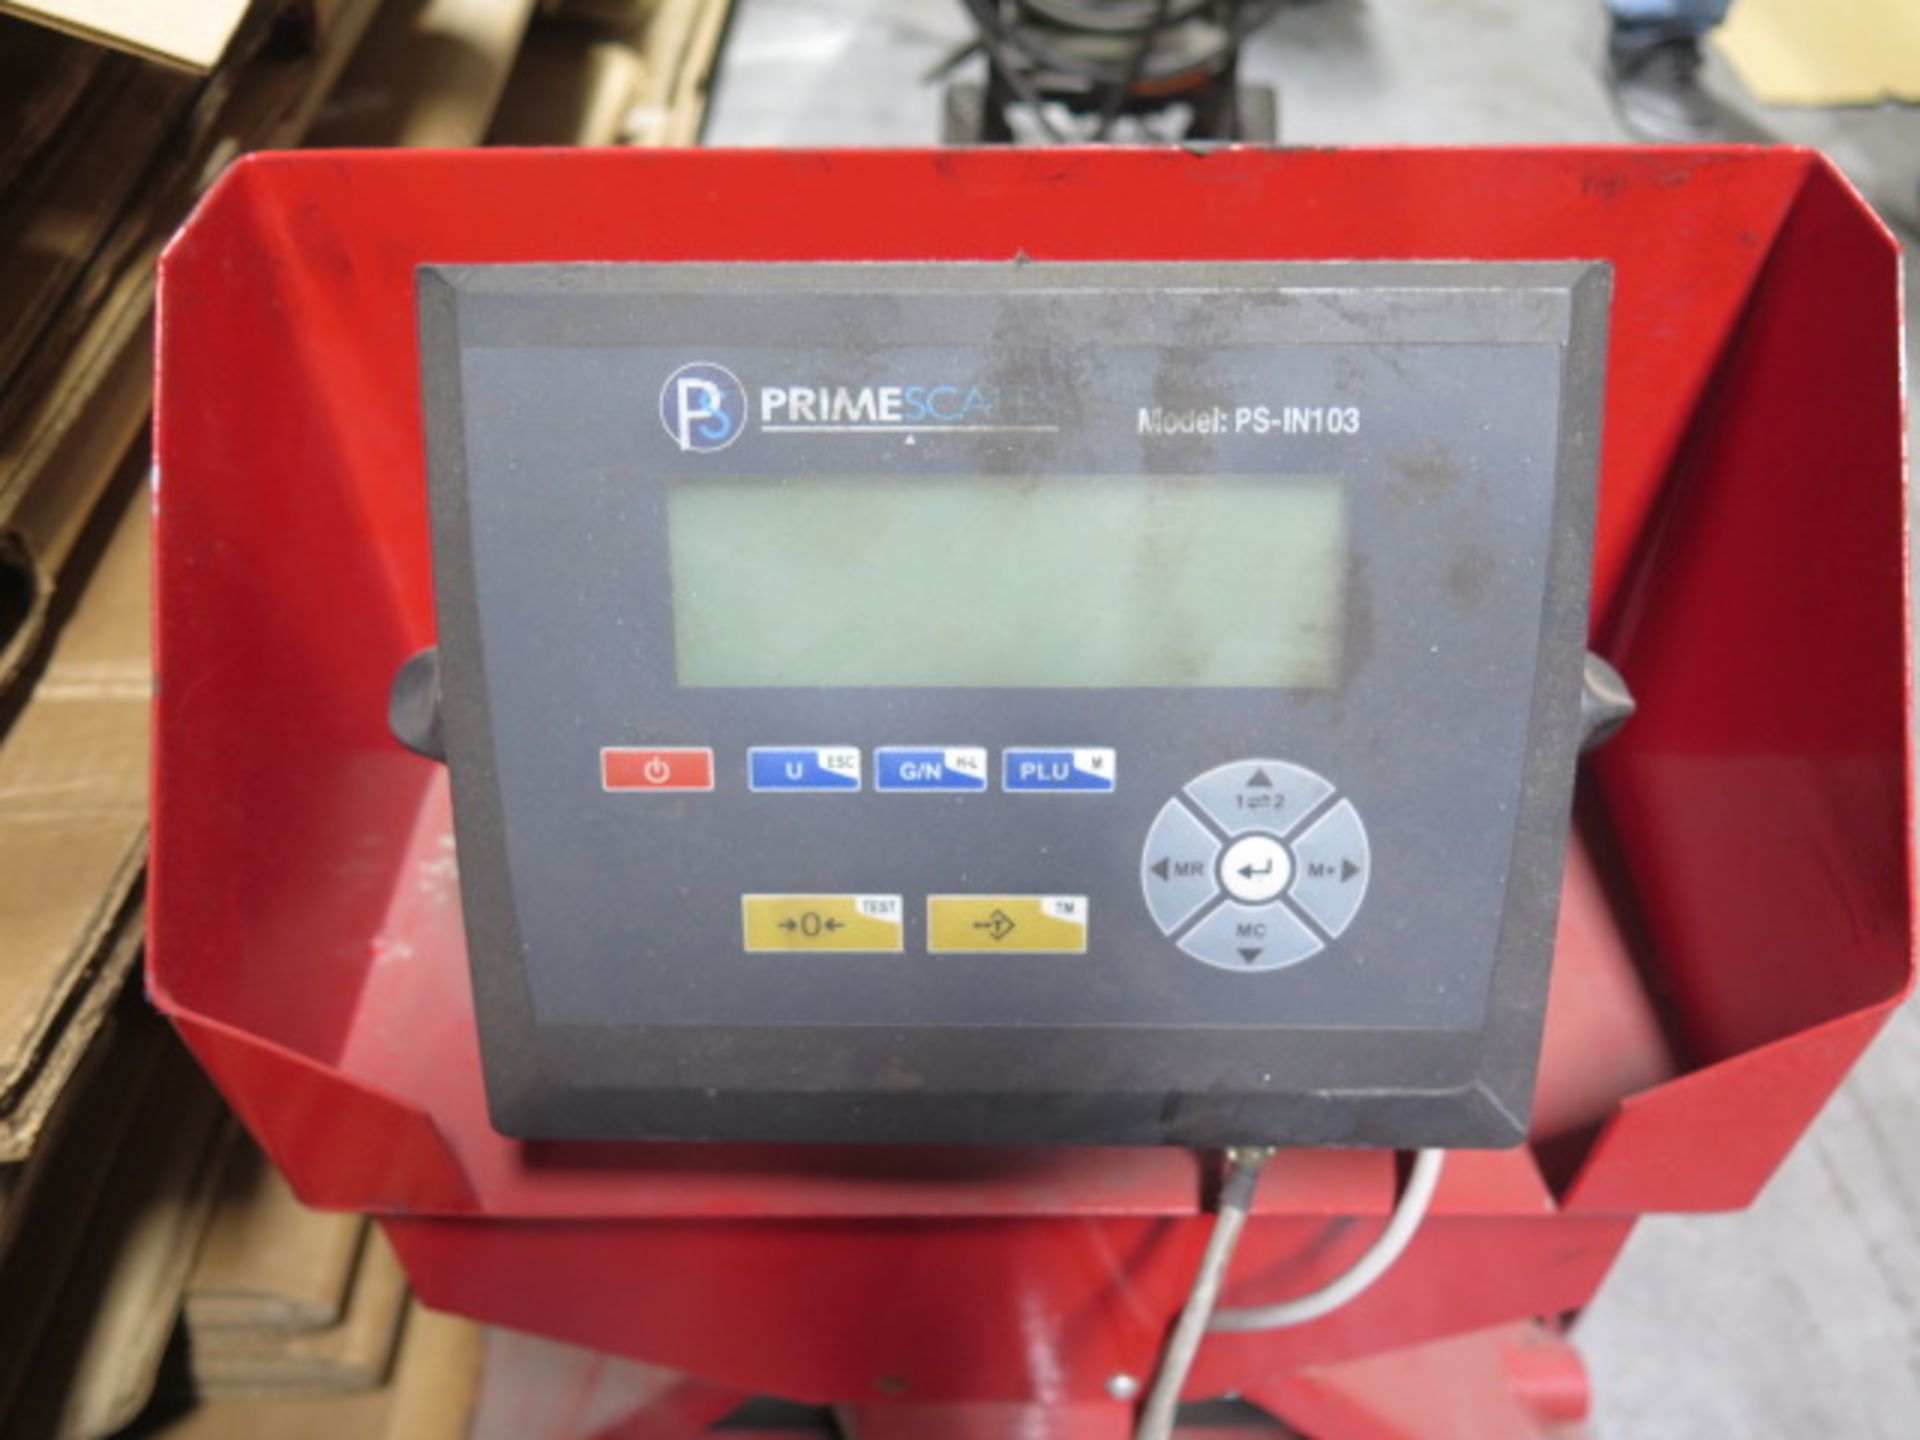 Prime Scale Weighing Pallet Jack w/ mdl. PS-IN103 Digital Scale (SOLD AS-IS - NO WARRANTY) - Image 5 of 5